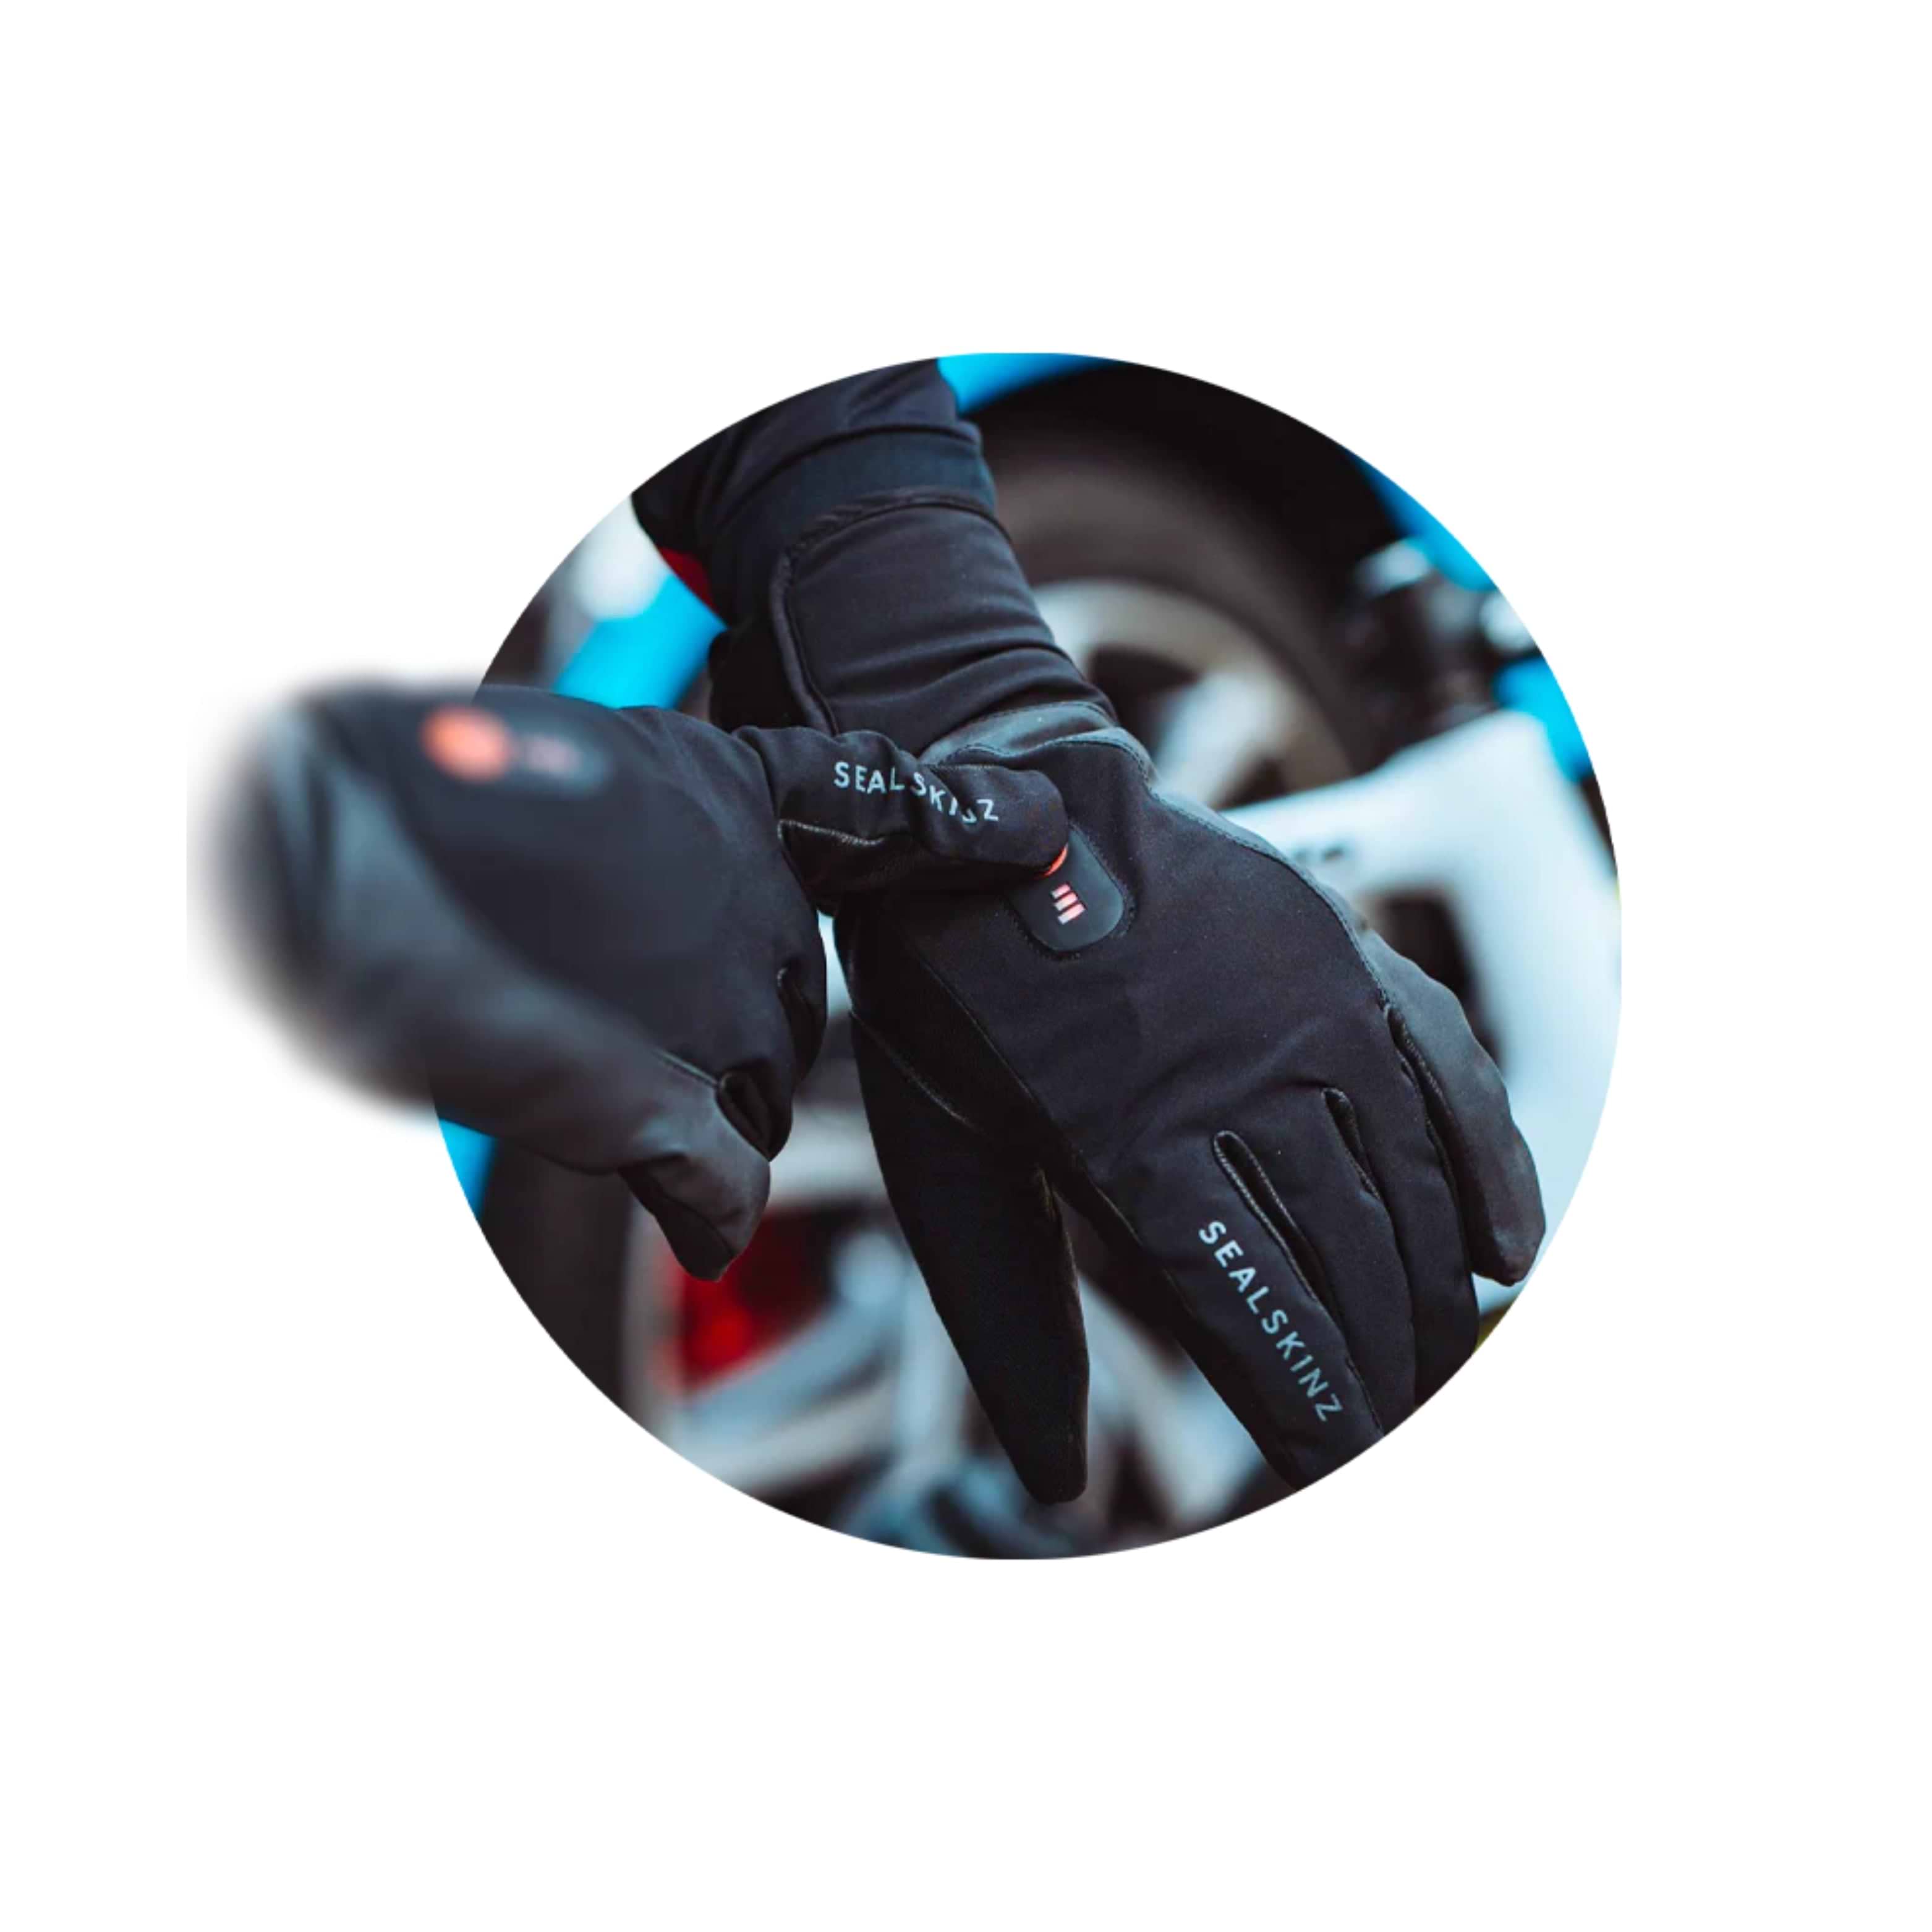 What are some good kayaking gloves for the cold winter days? I've